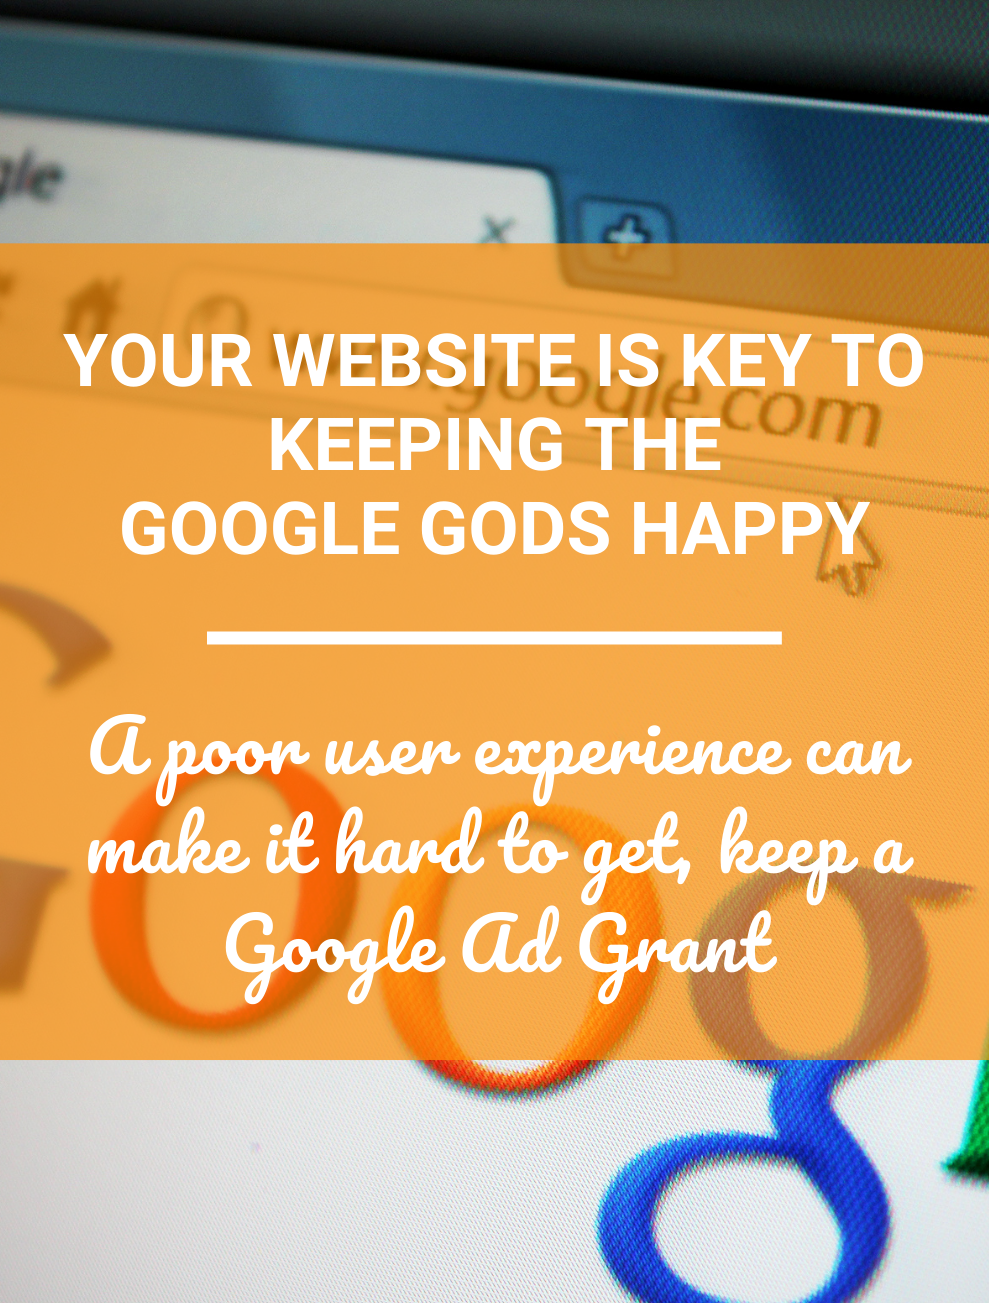 Google Ad Grants take your website seriously